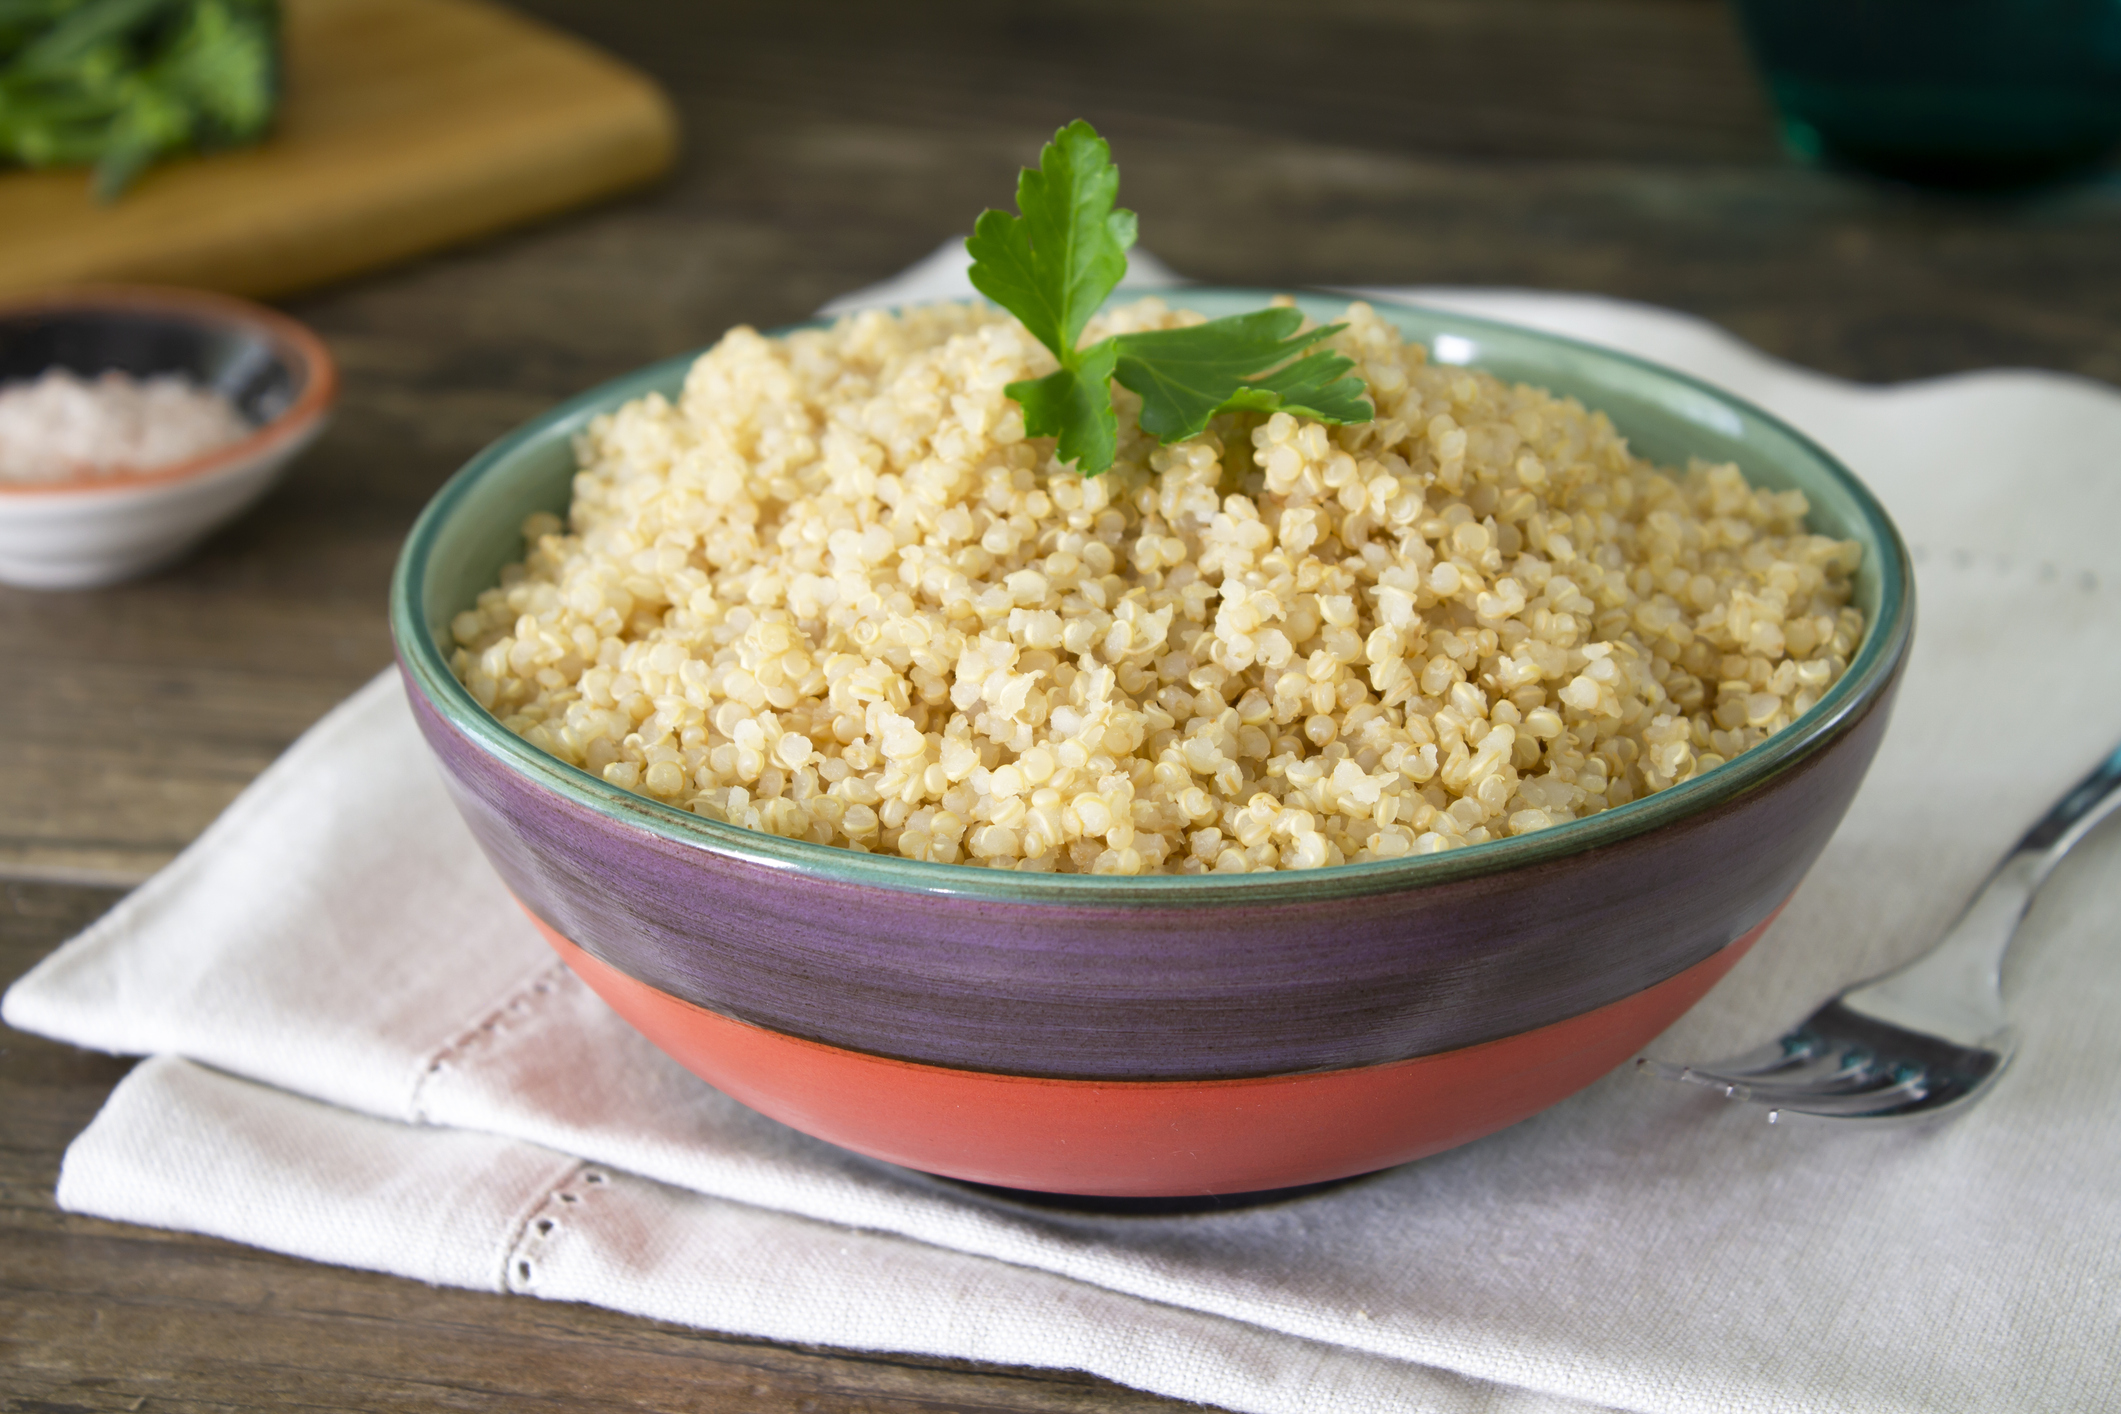 In the kitchen with Kelley: Quinoa fried ‘rice’